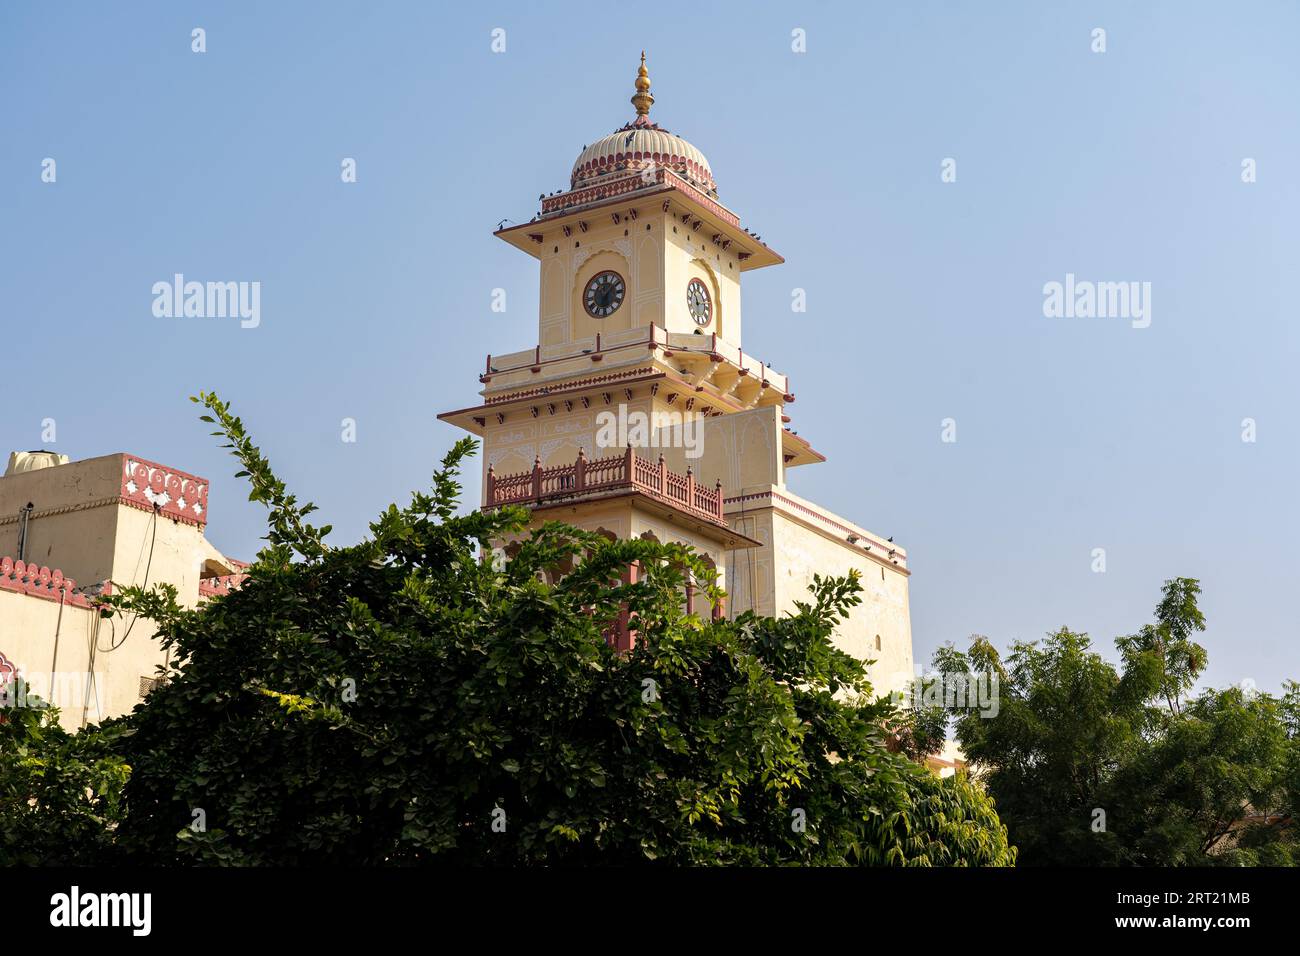 Jaipur, India, December 11, 2019: Exterior view of the clock tower at the City Palace Stock Photo